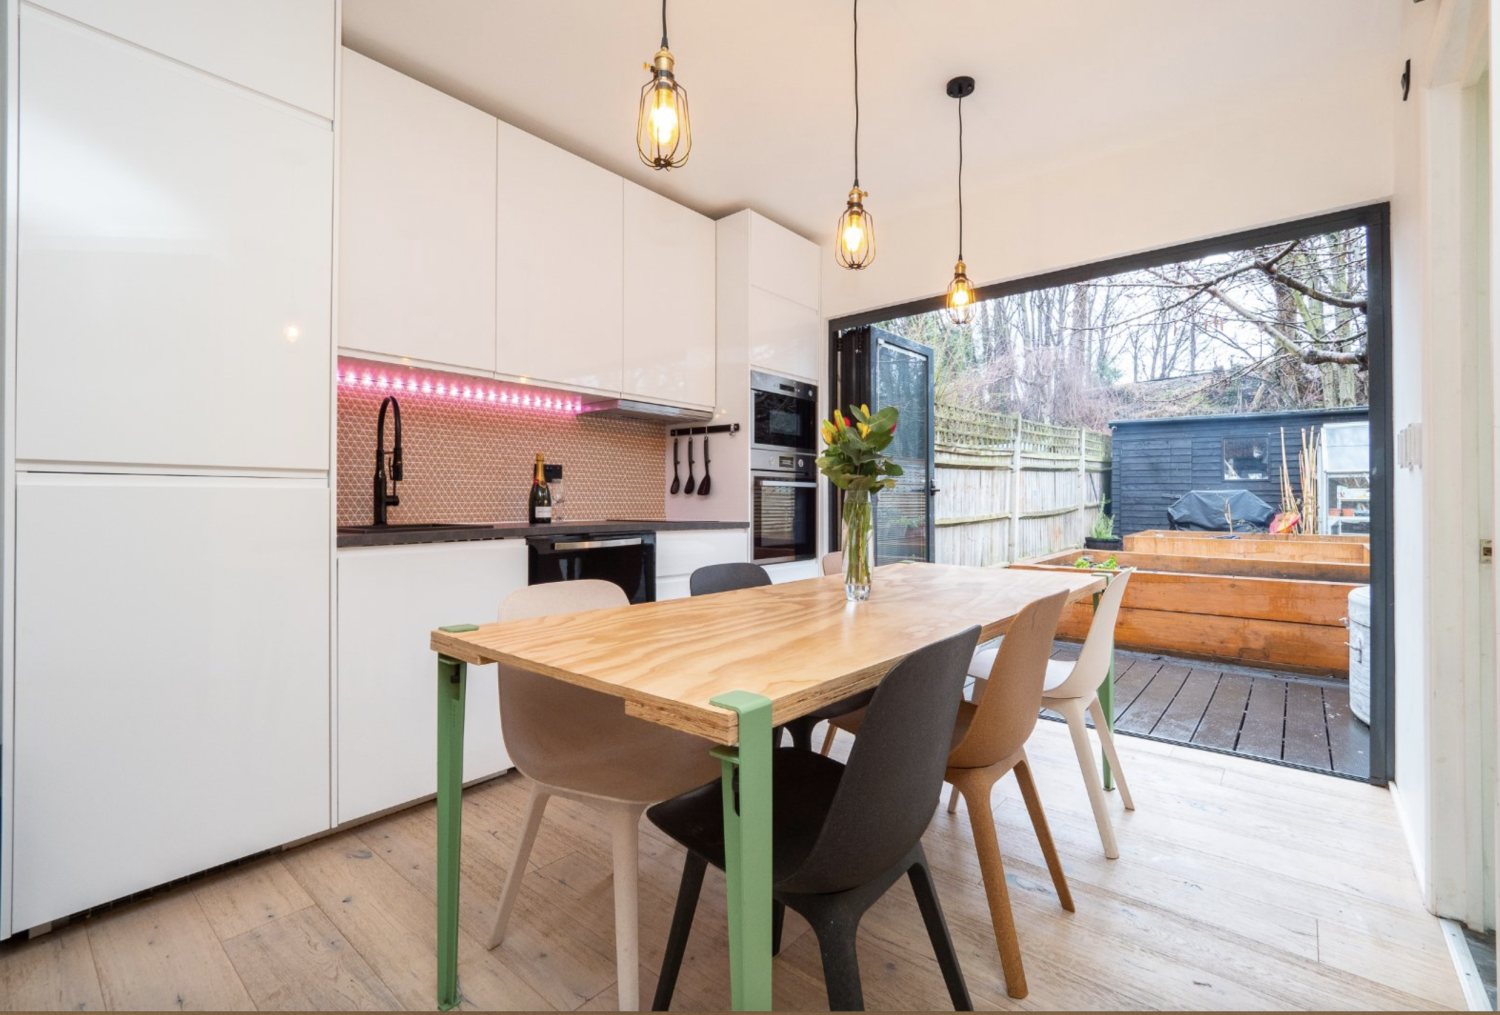 Inside the annexe at the bottom of a family home, with dining area and kitchen and a fold 